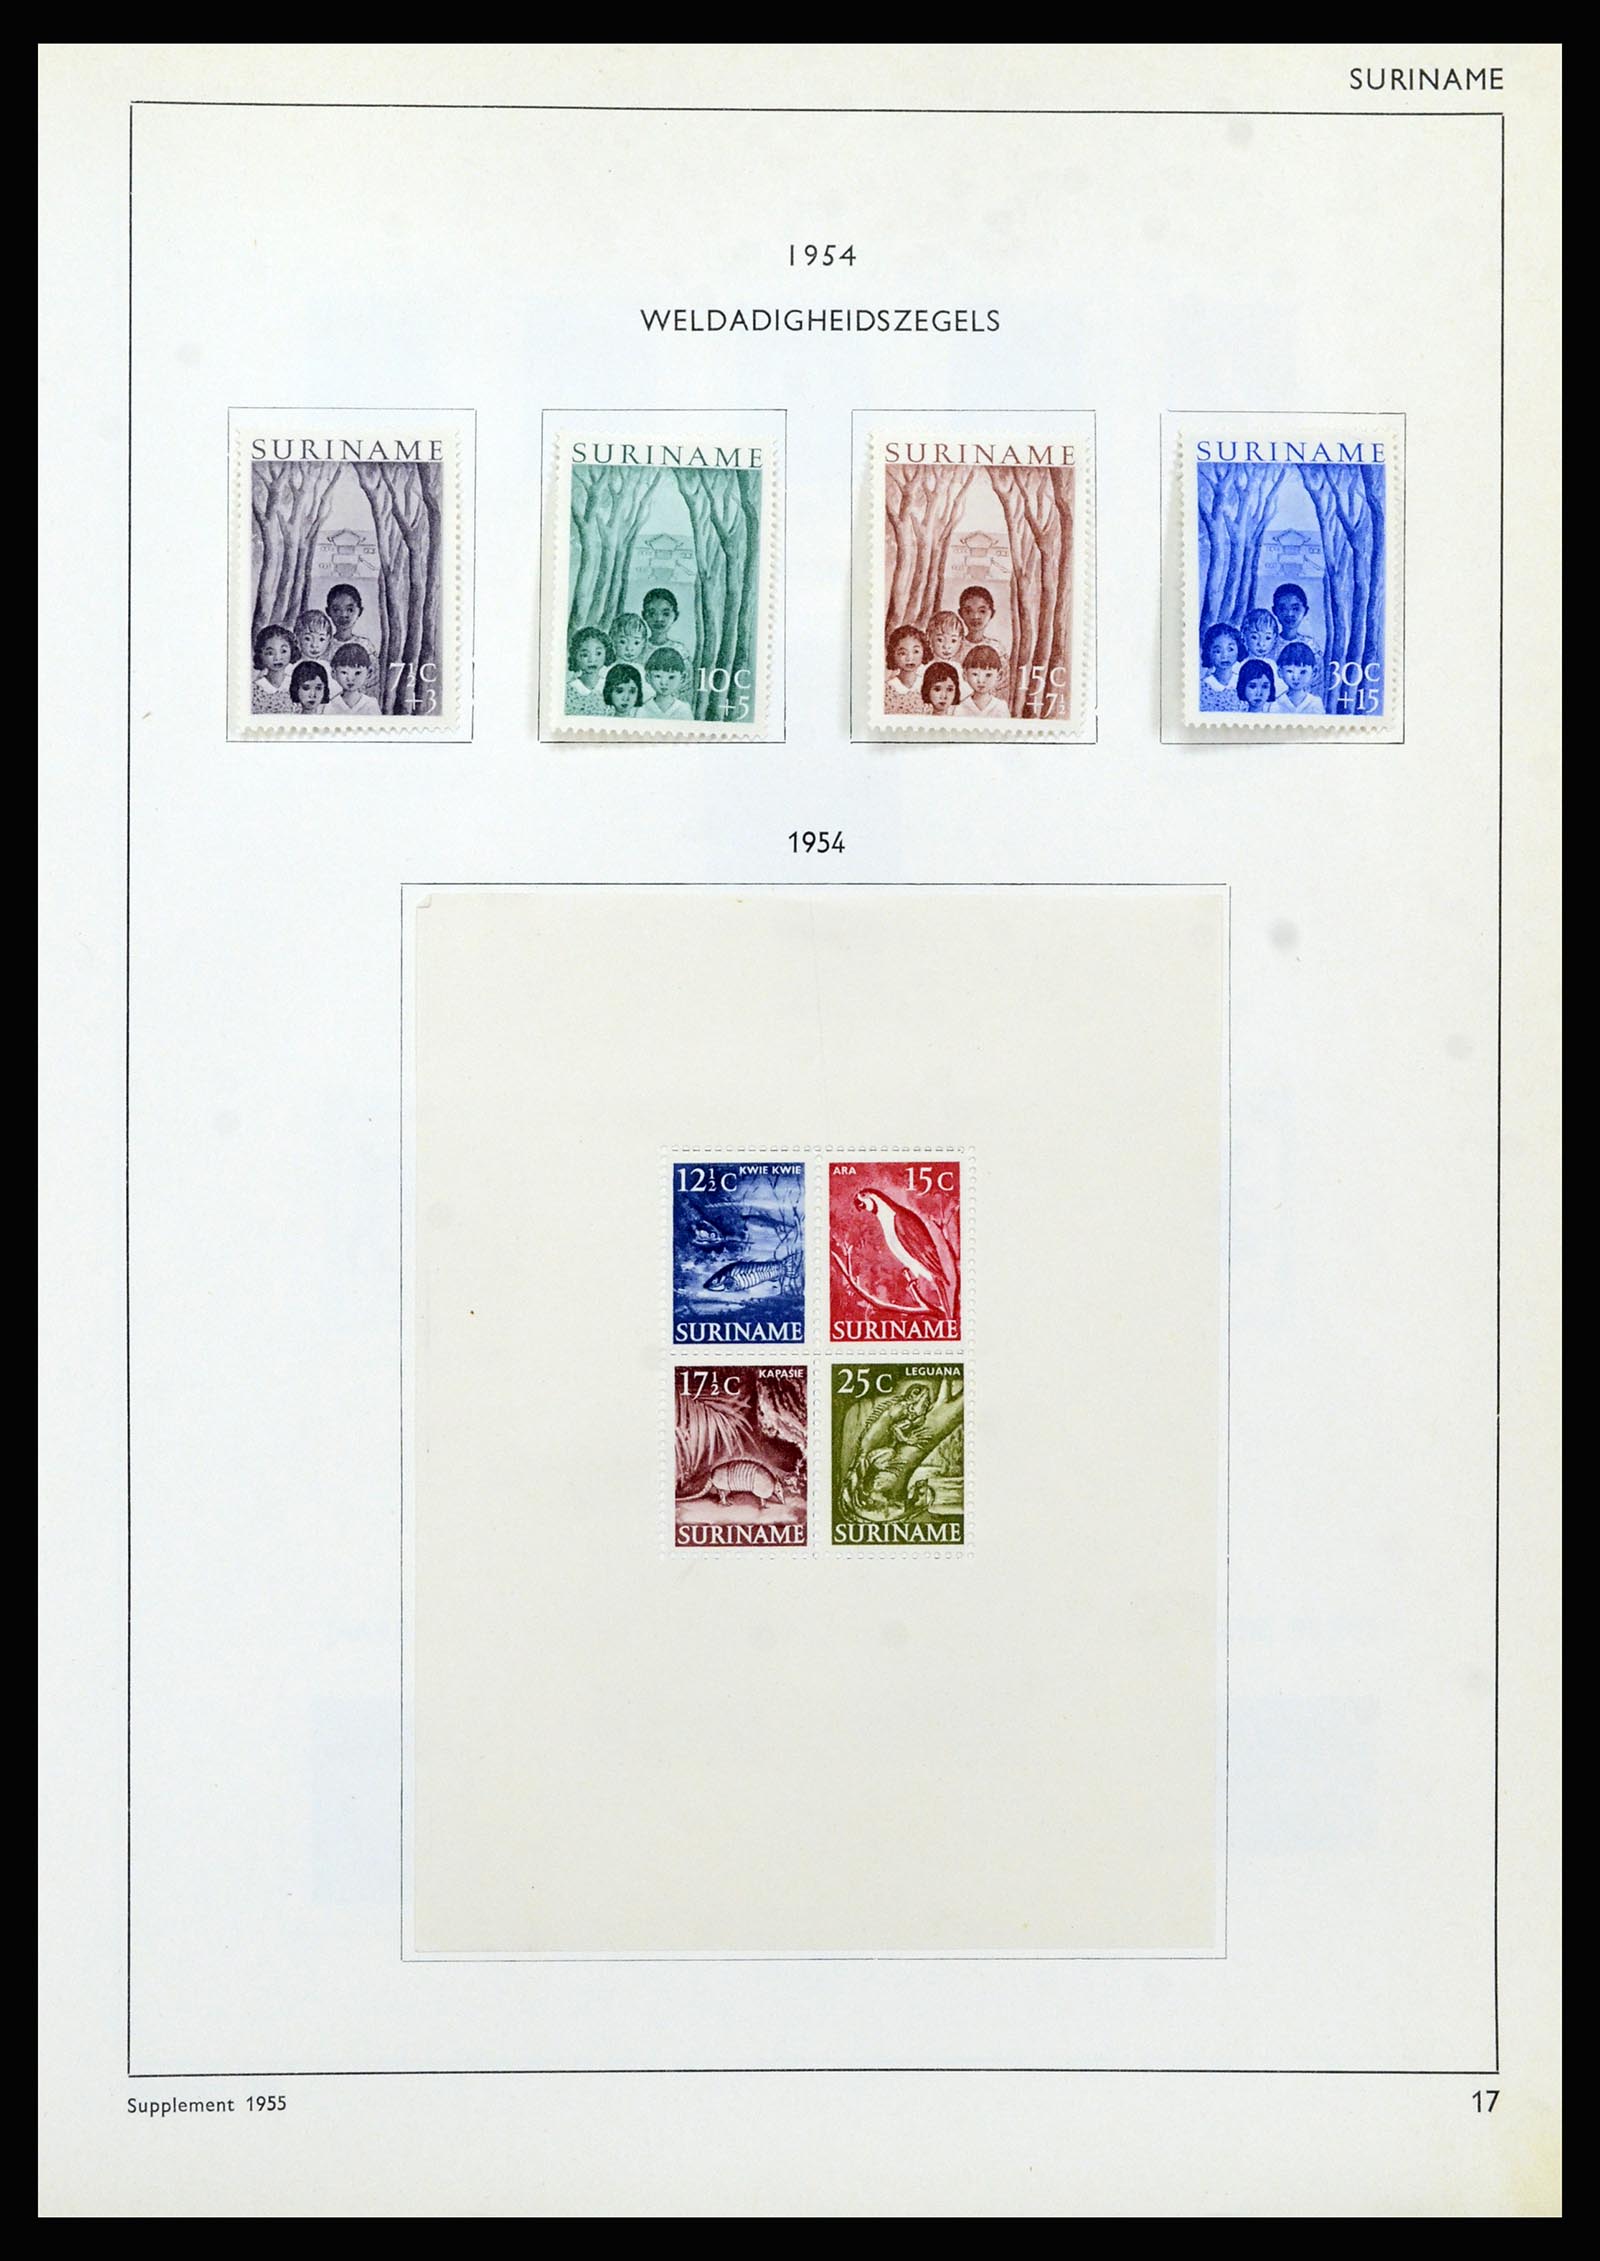 37217 100 - Stamp collection 37217 Dutch territories 1864-1975.